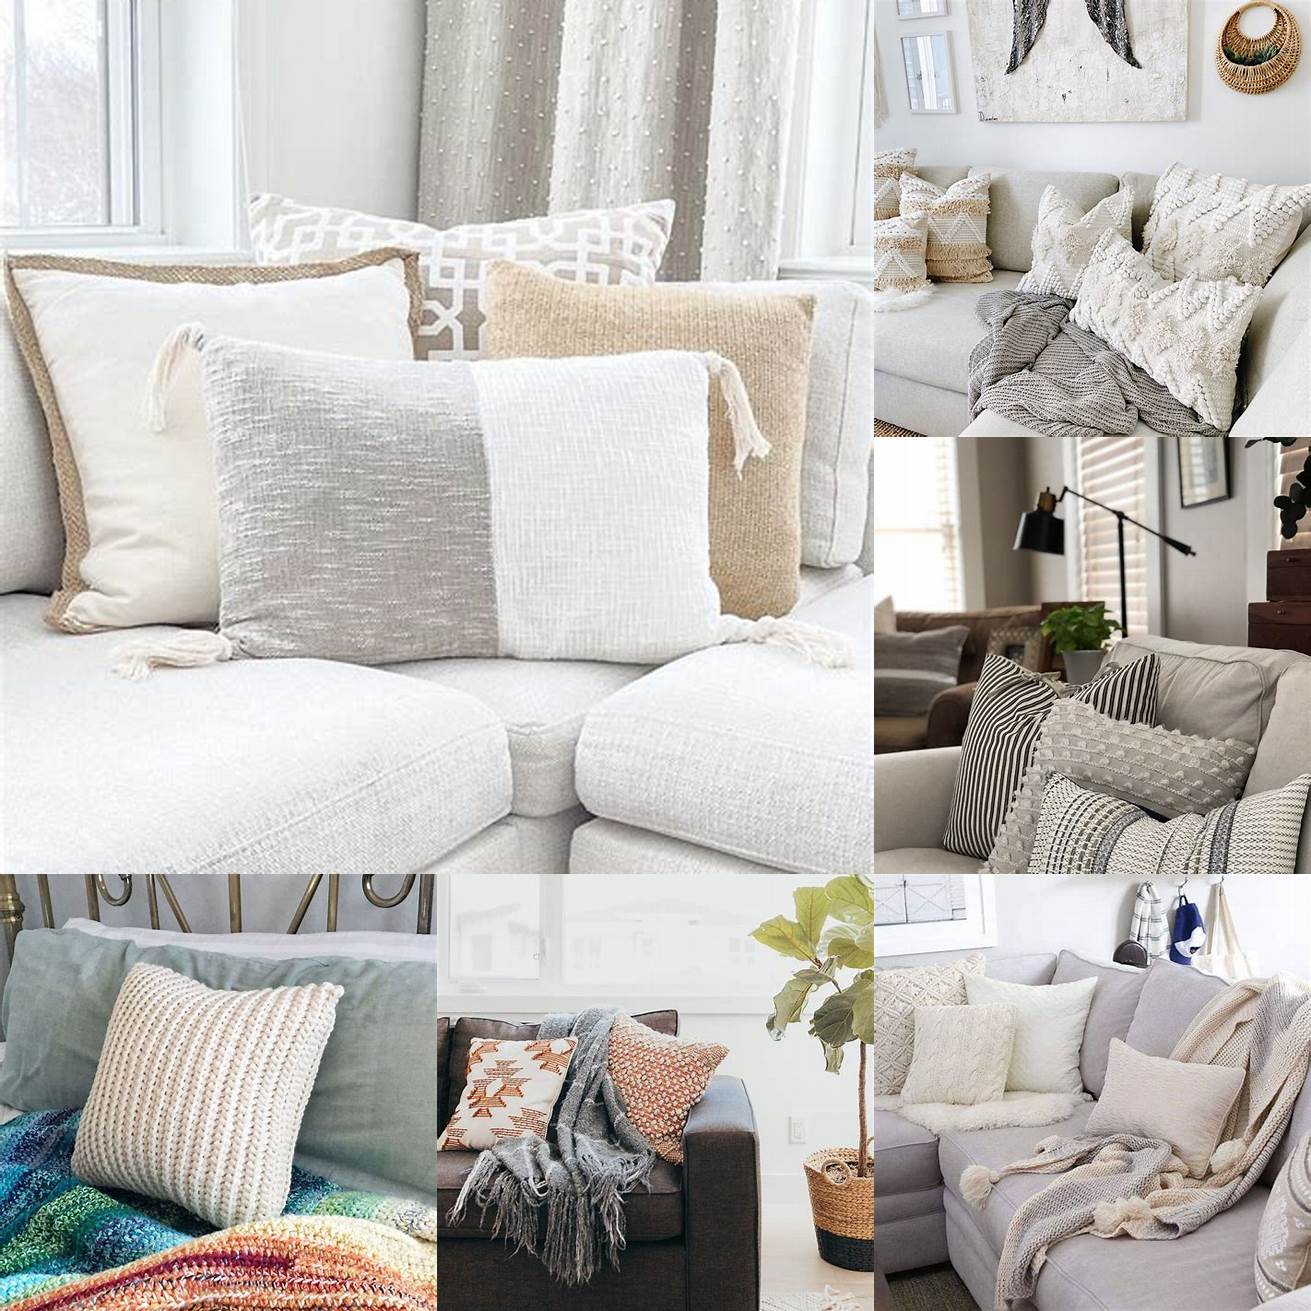 Add texture with throw pillows and blankets